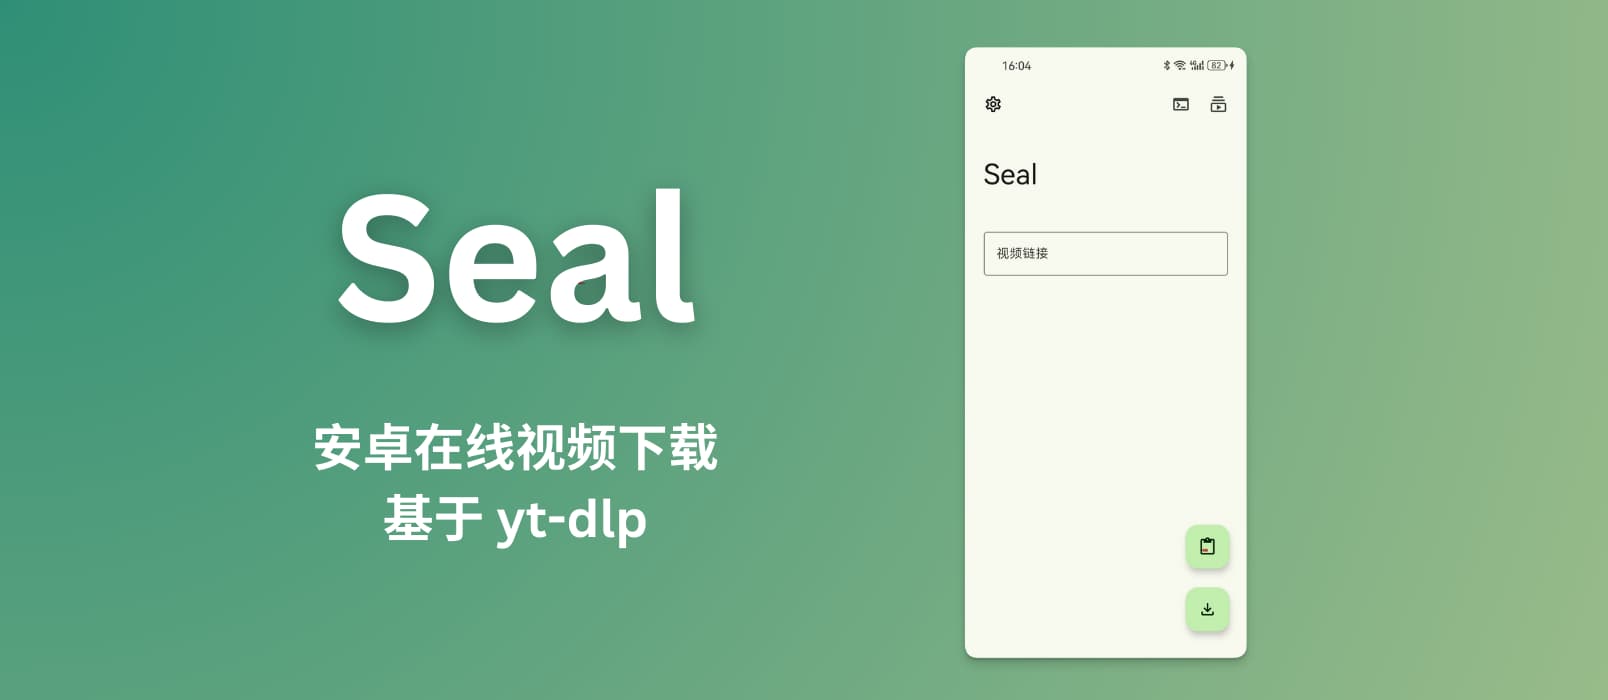 Seal - Android online video download application based on yt-dlp, supports thousands of online video platforms